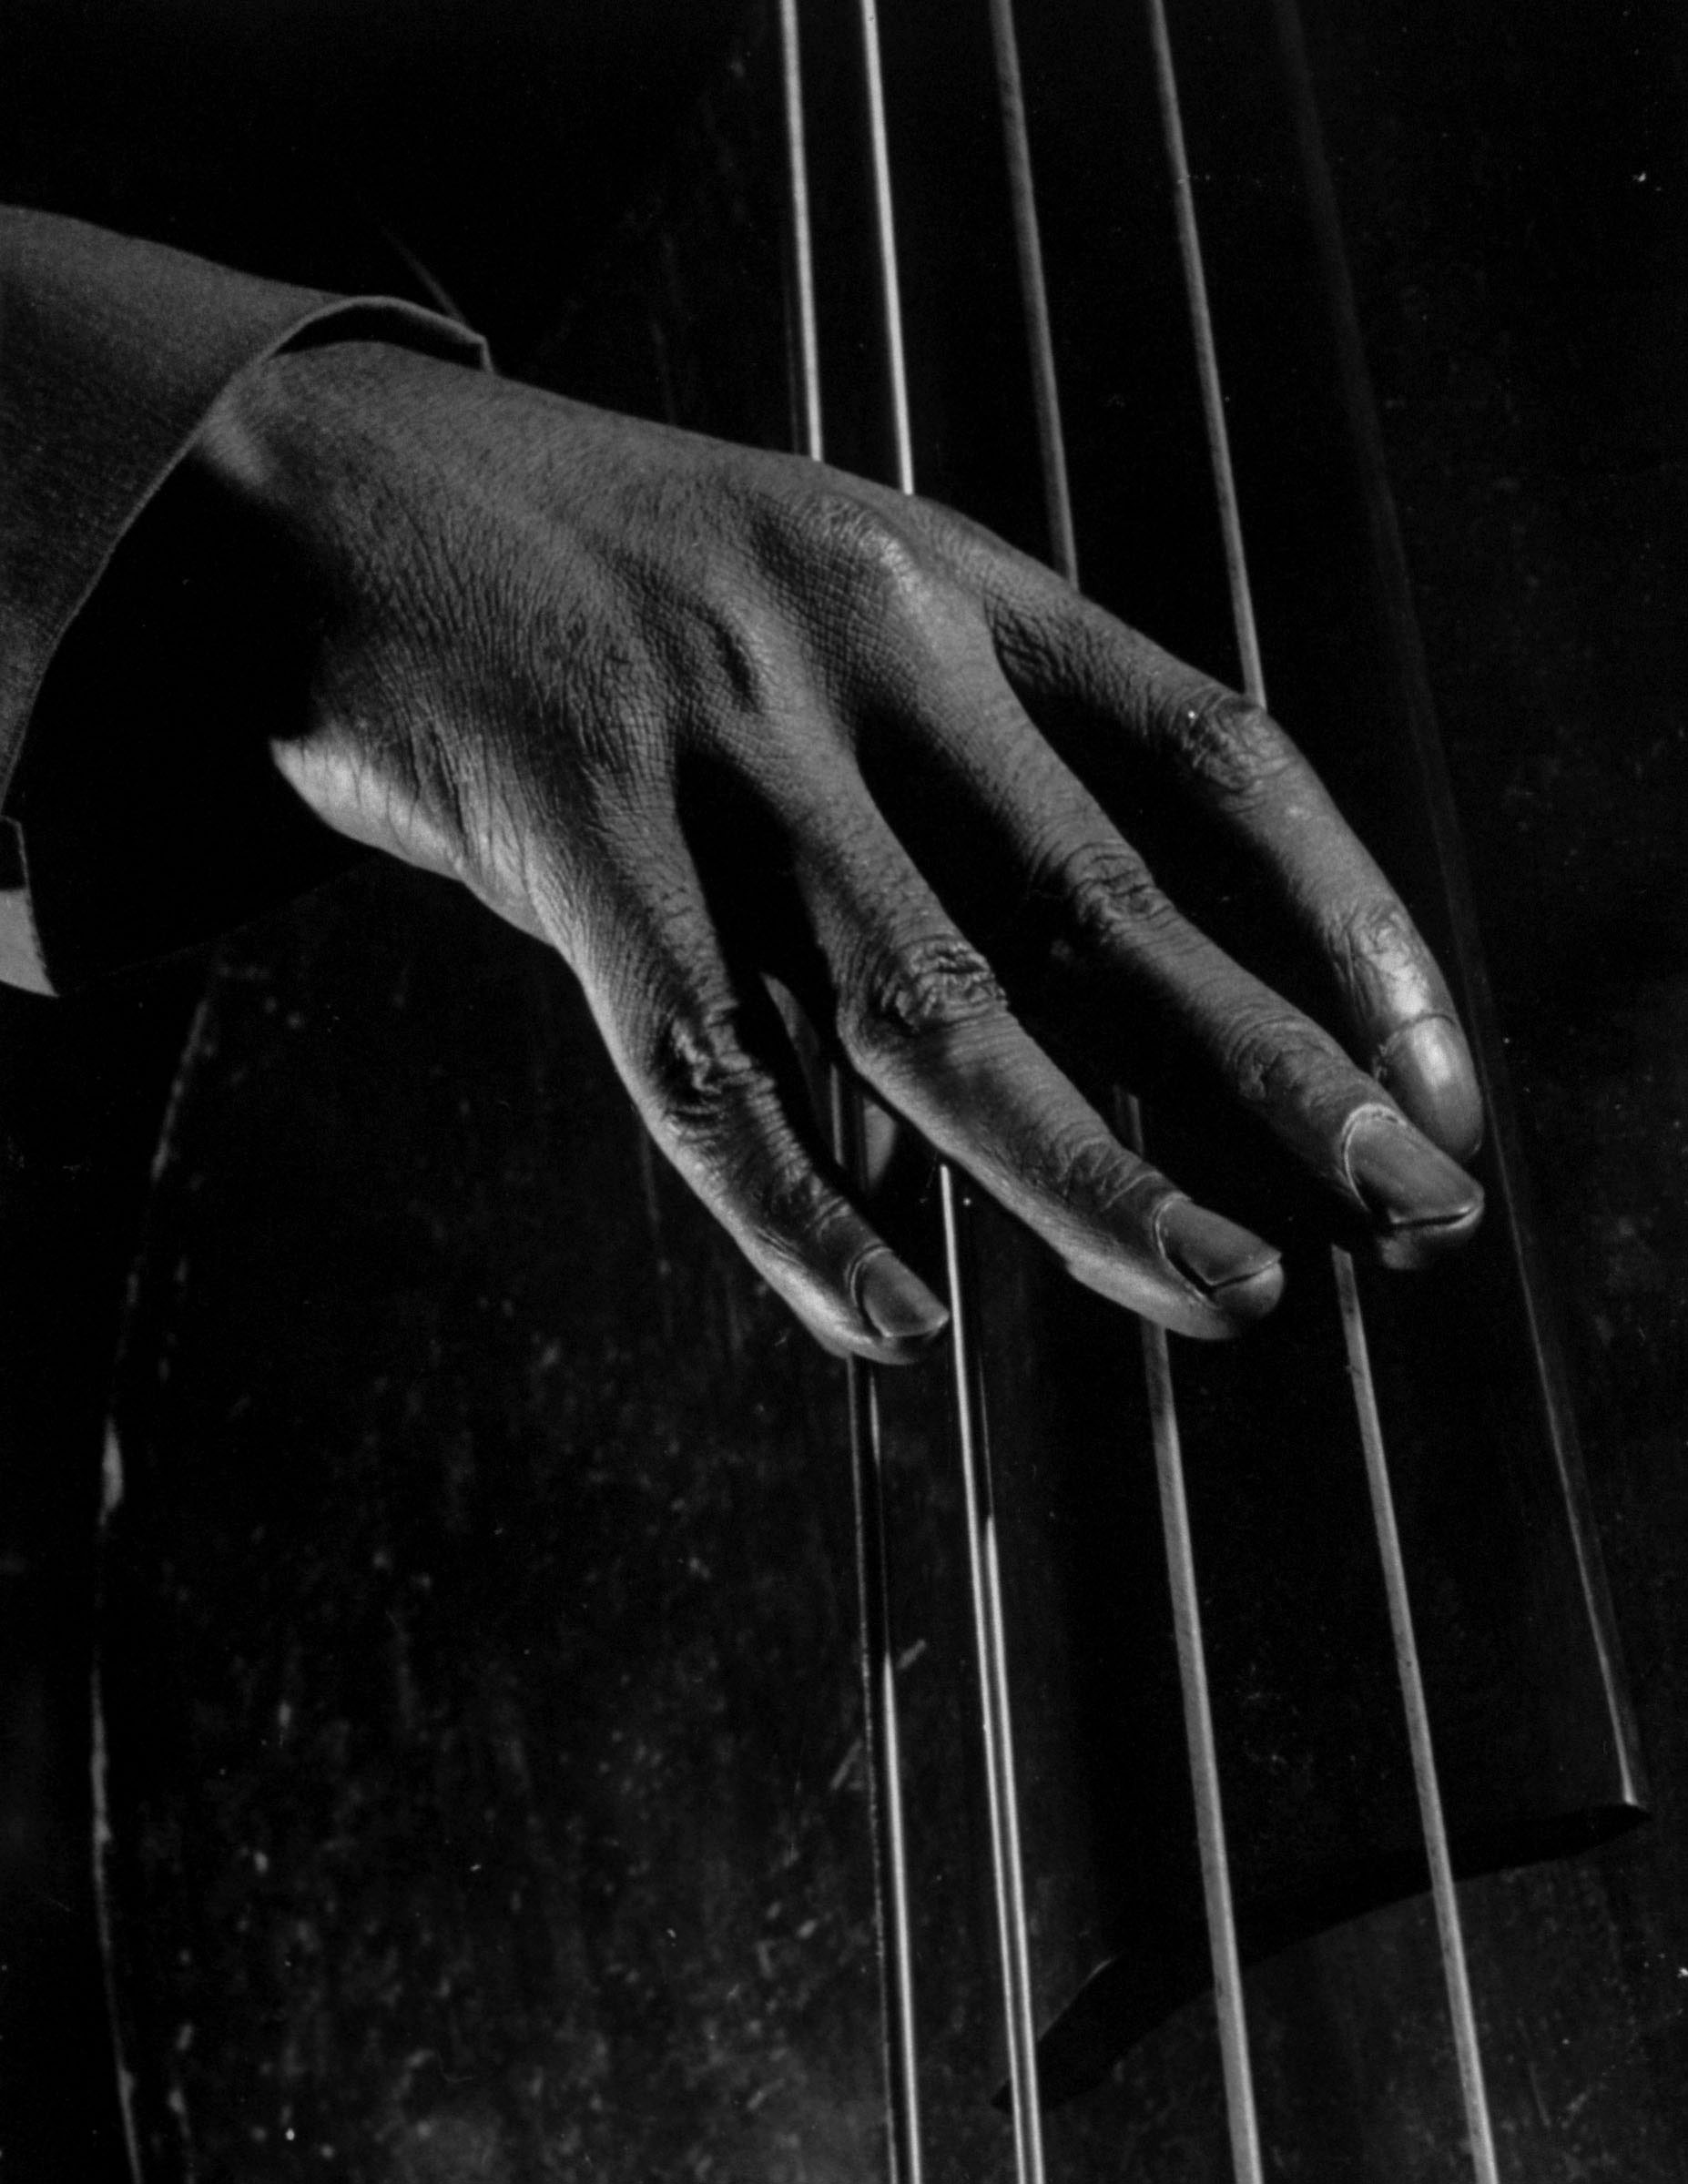 An unidentified bass player's fingers, 1943.